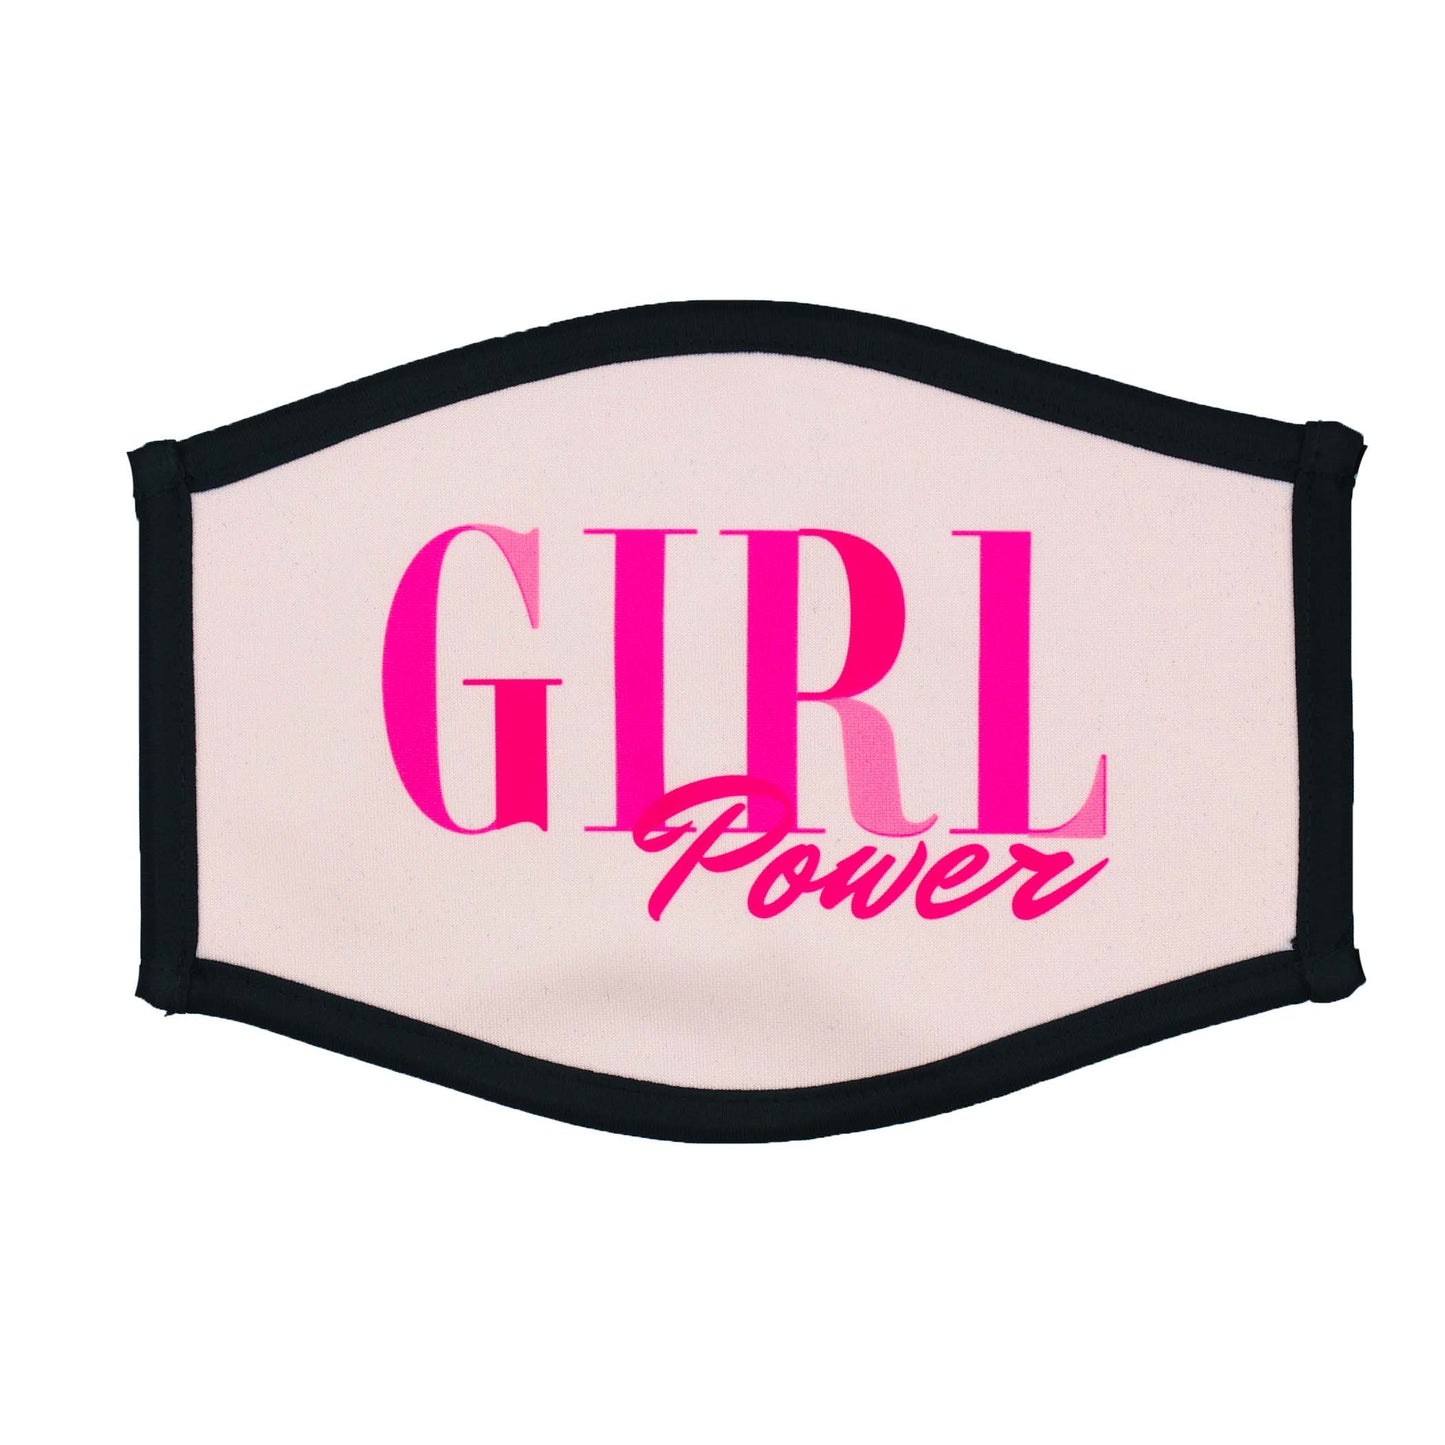 NEW--THE "GIRL POWER" FACE MASK